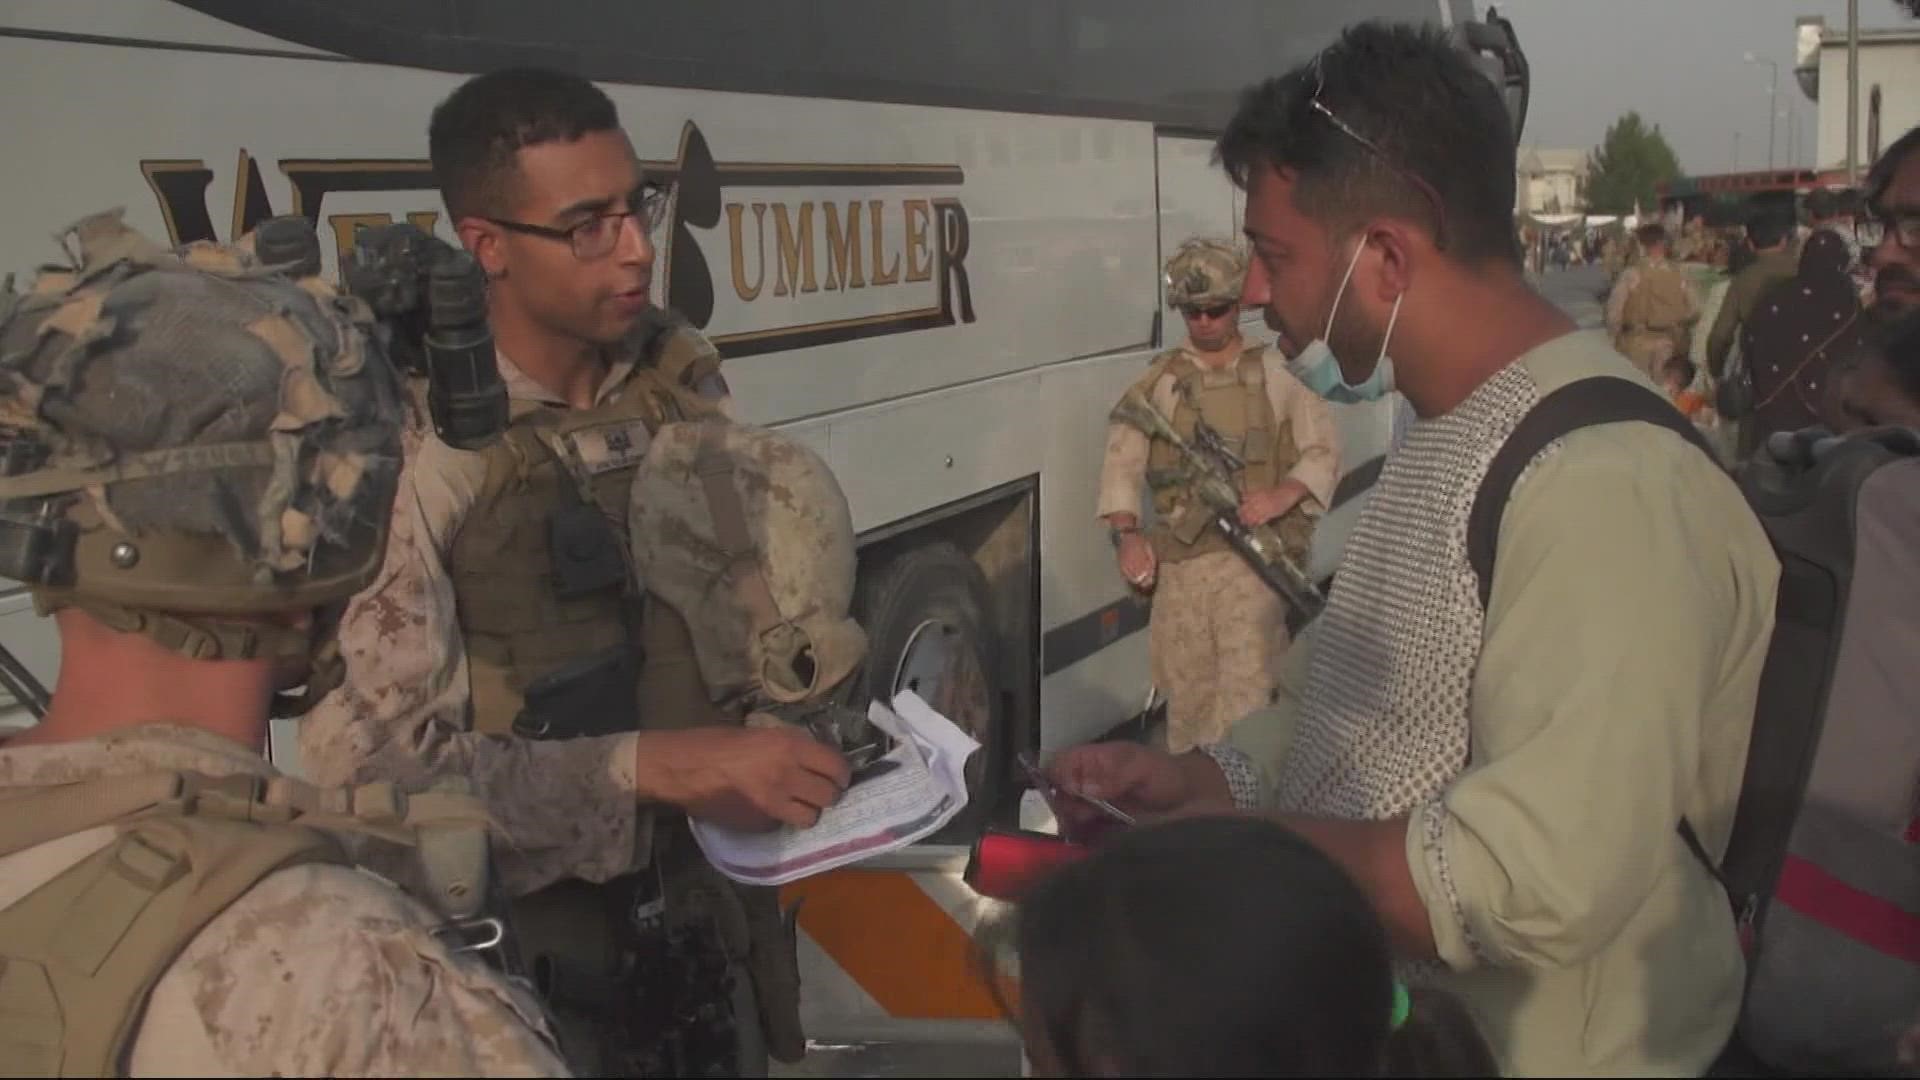 Soldiers express that it has been challenging but exciting helping the Afghan refugees as they settle in a new country.